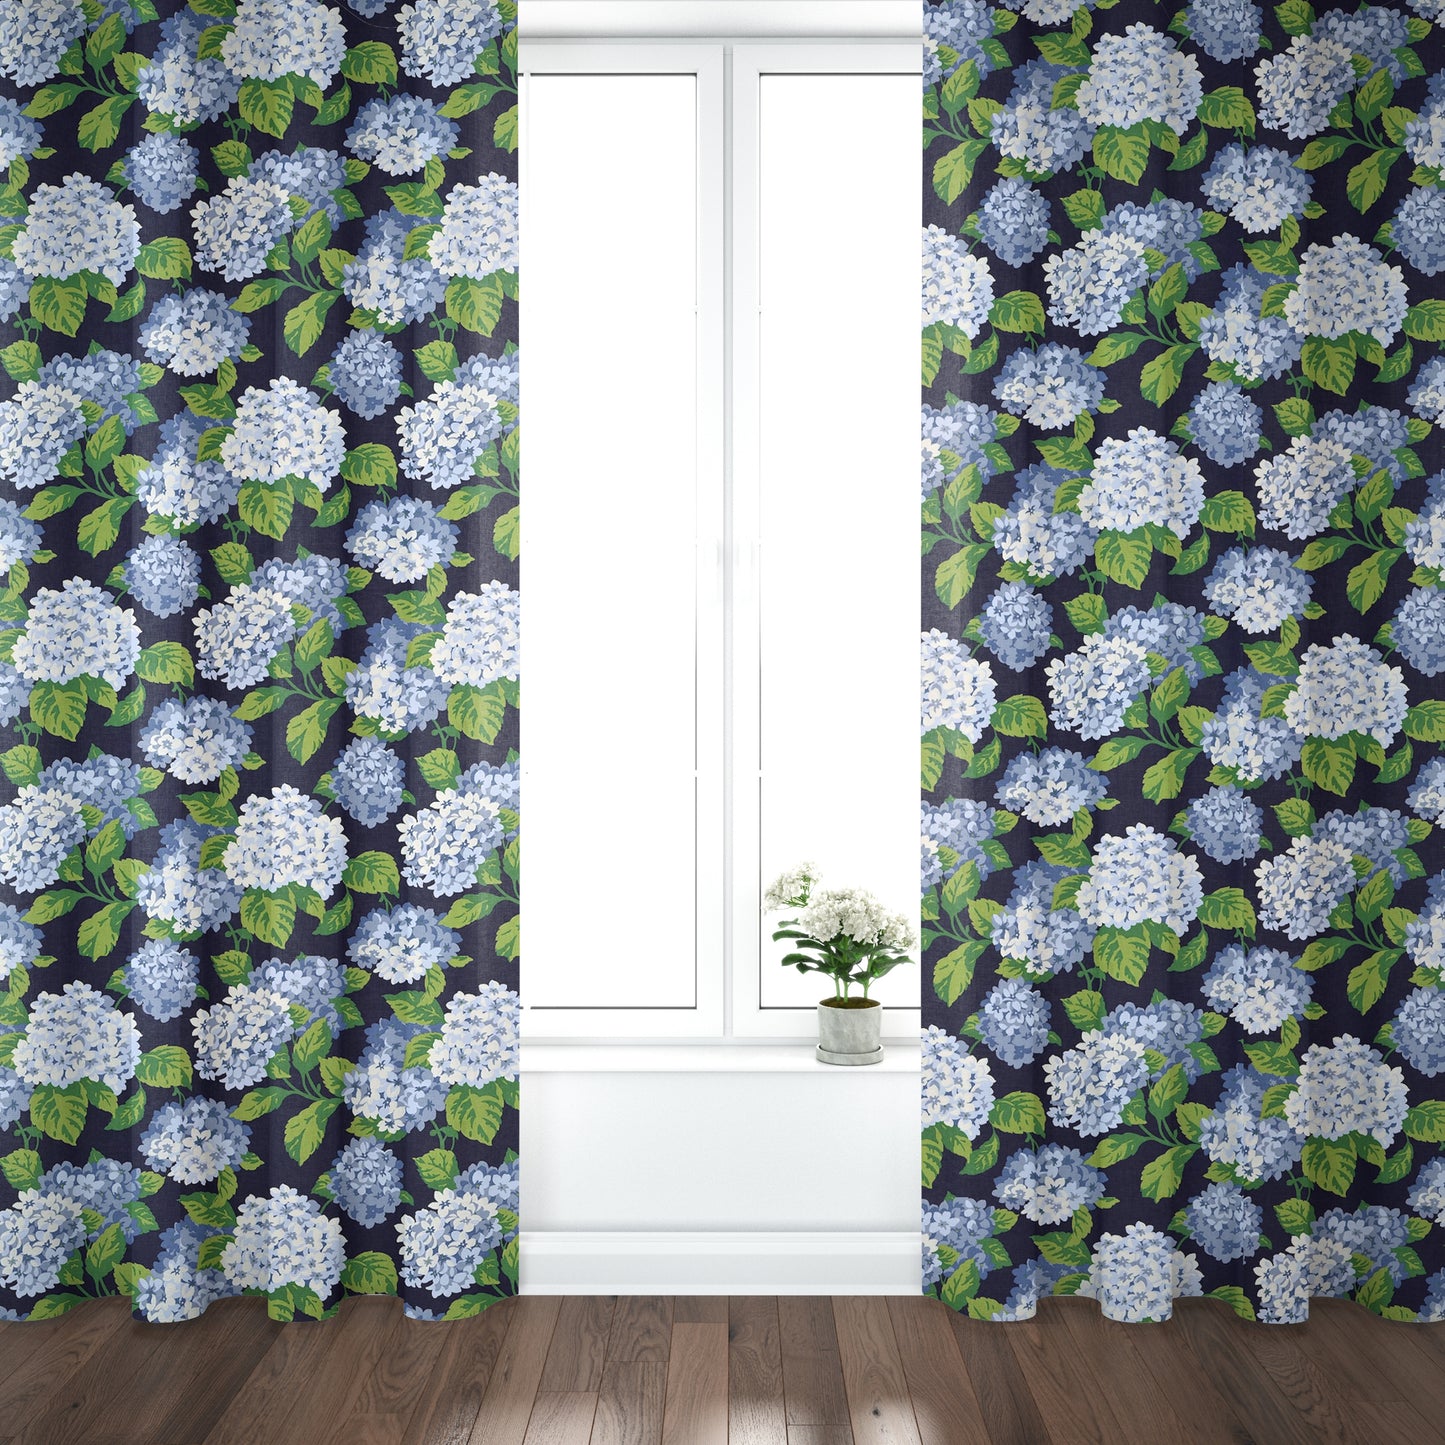 Tab Top Curtains in Summerwind Navy Blue Hydrangea Floral, Large Scale